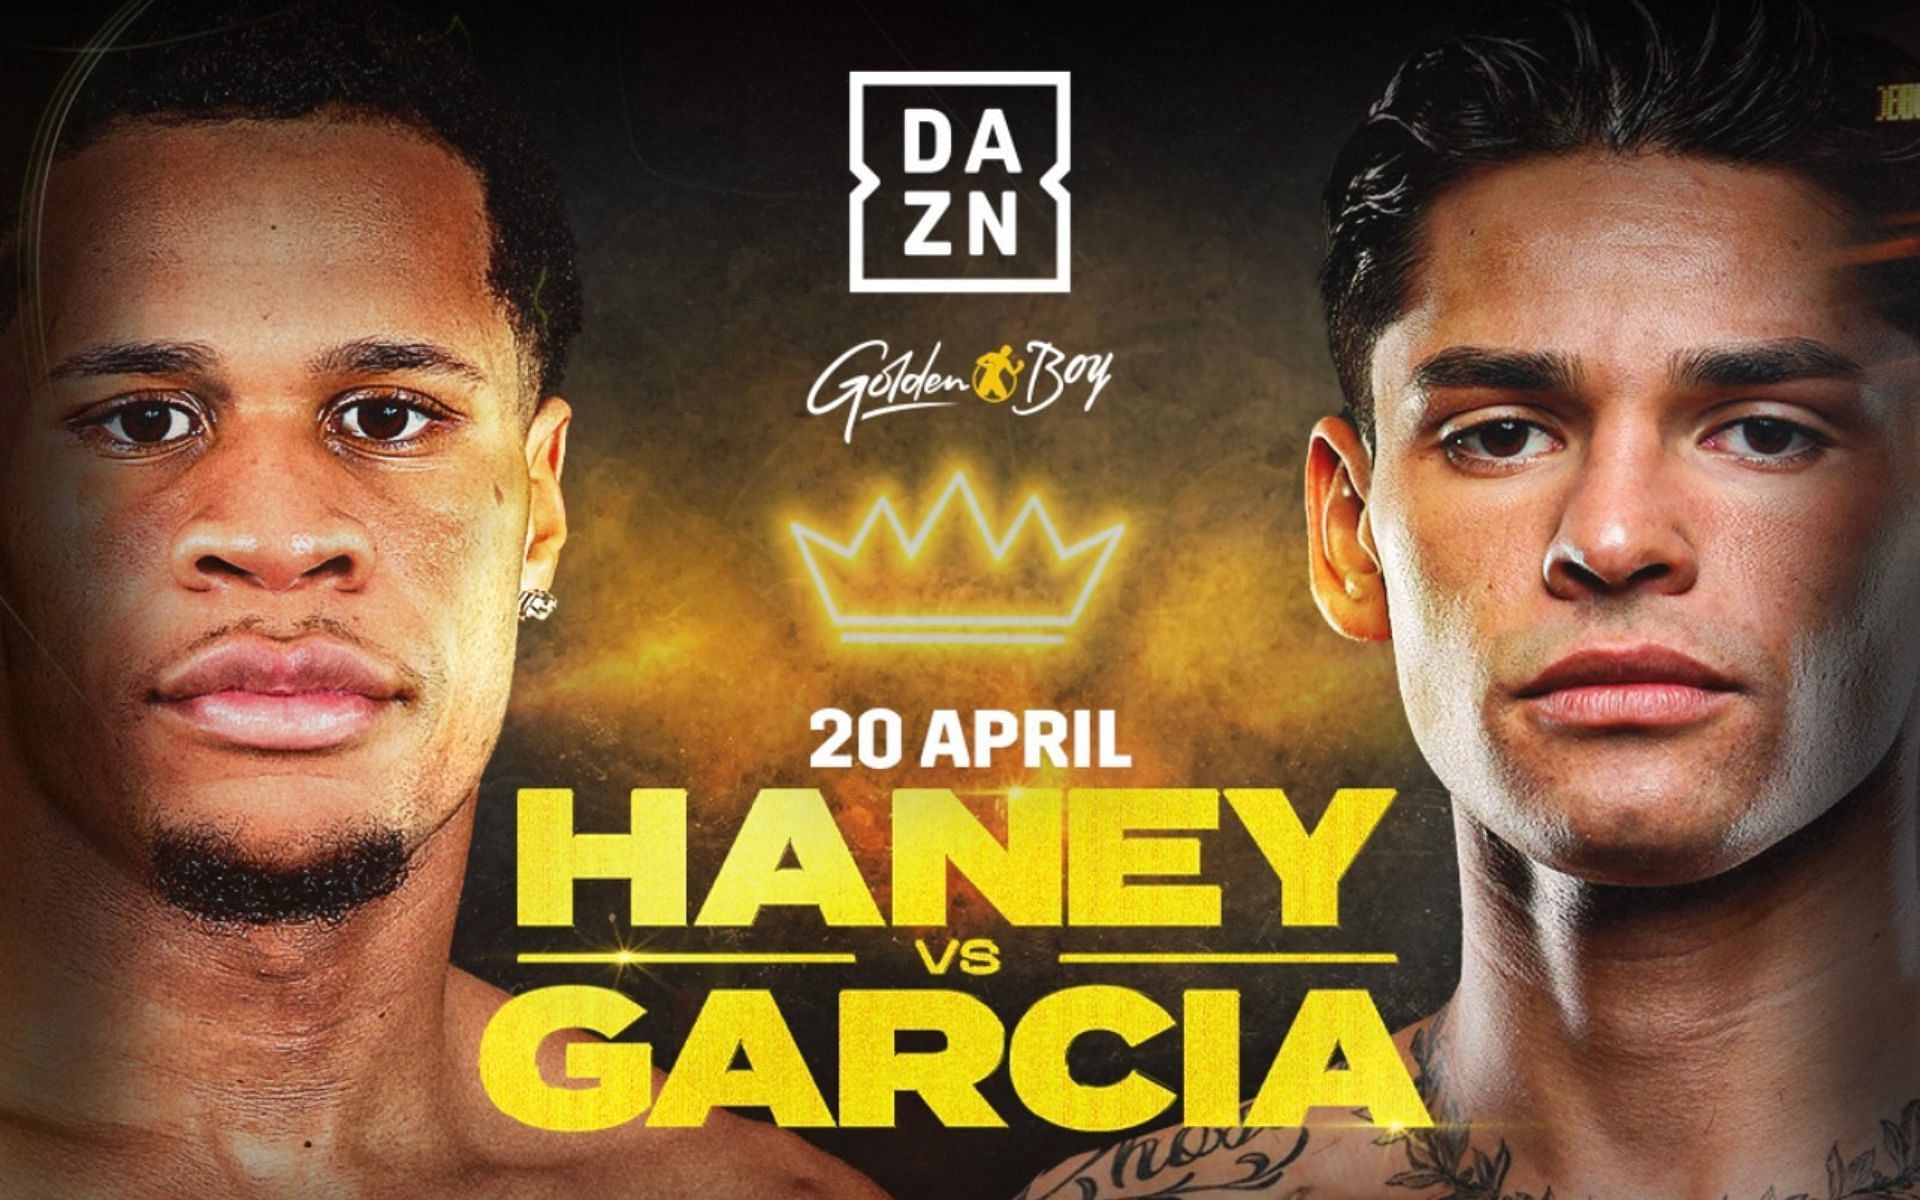 Devin Haney and Ryan Garcia competed on April 20 [Image credits: @DAZNBoxing on Instagram]